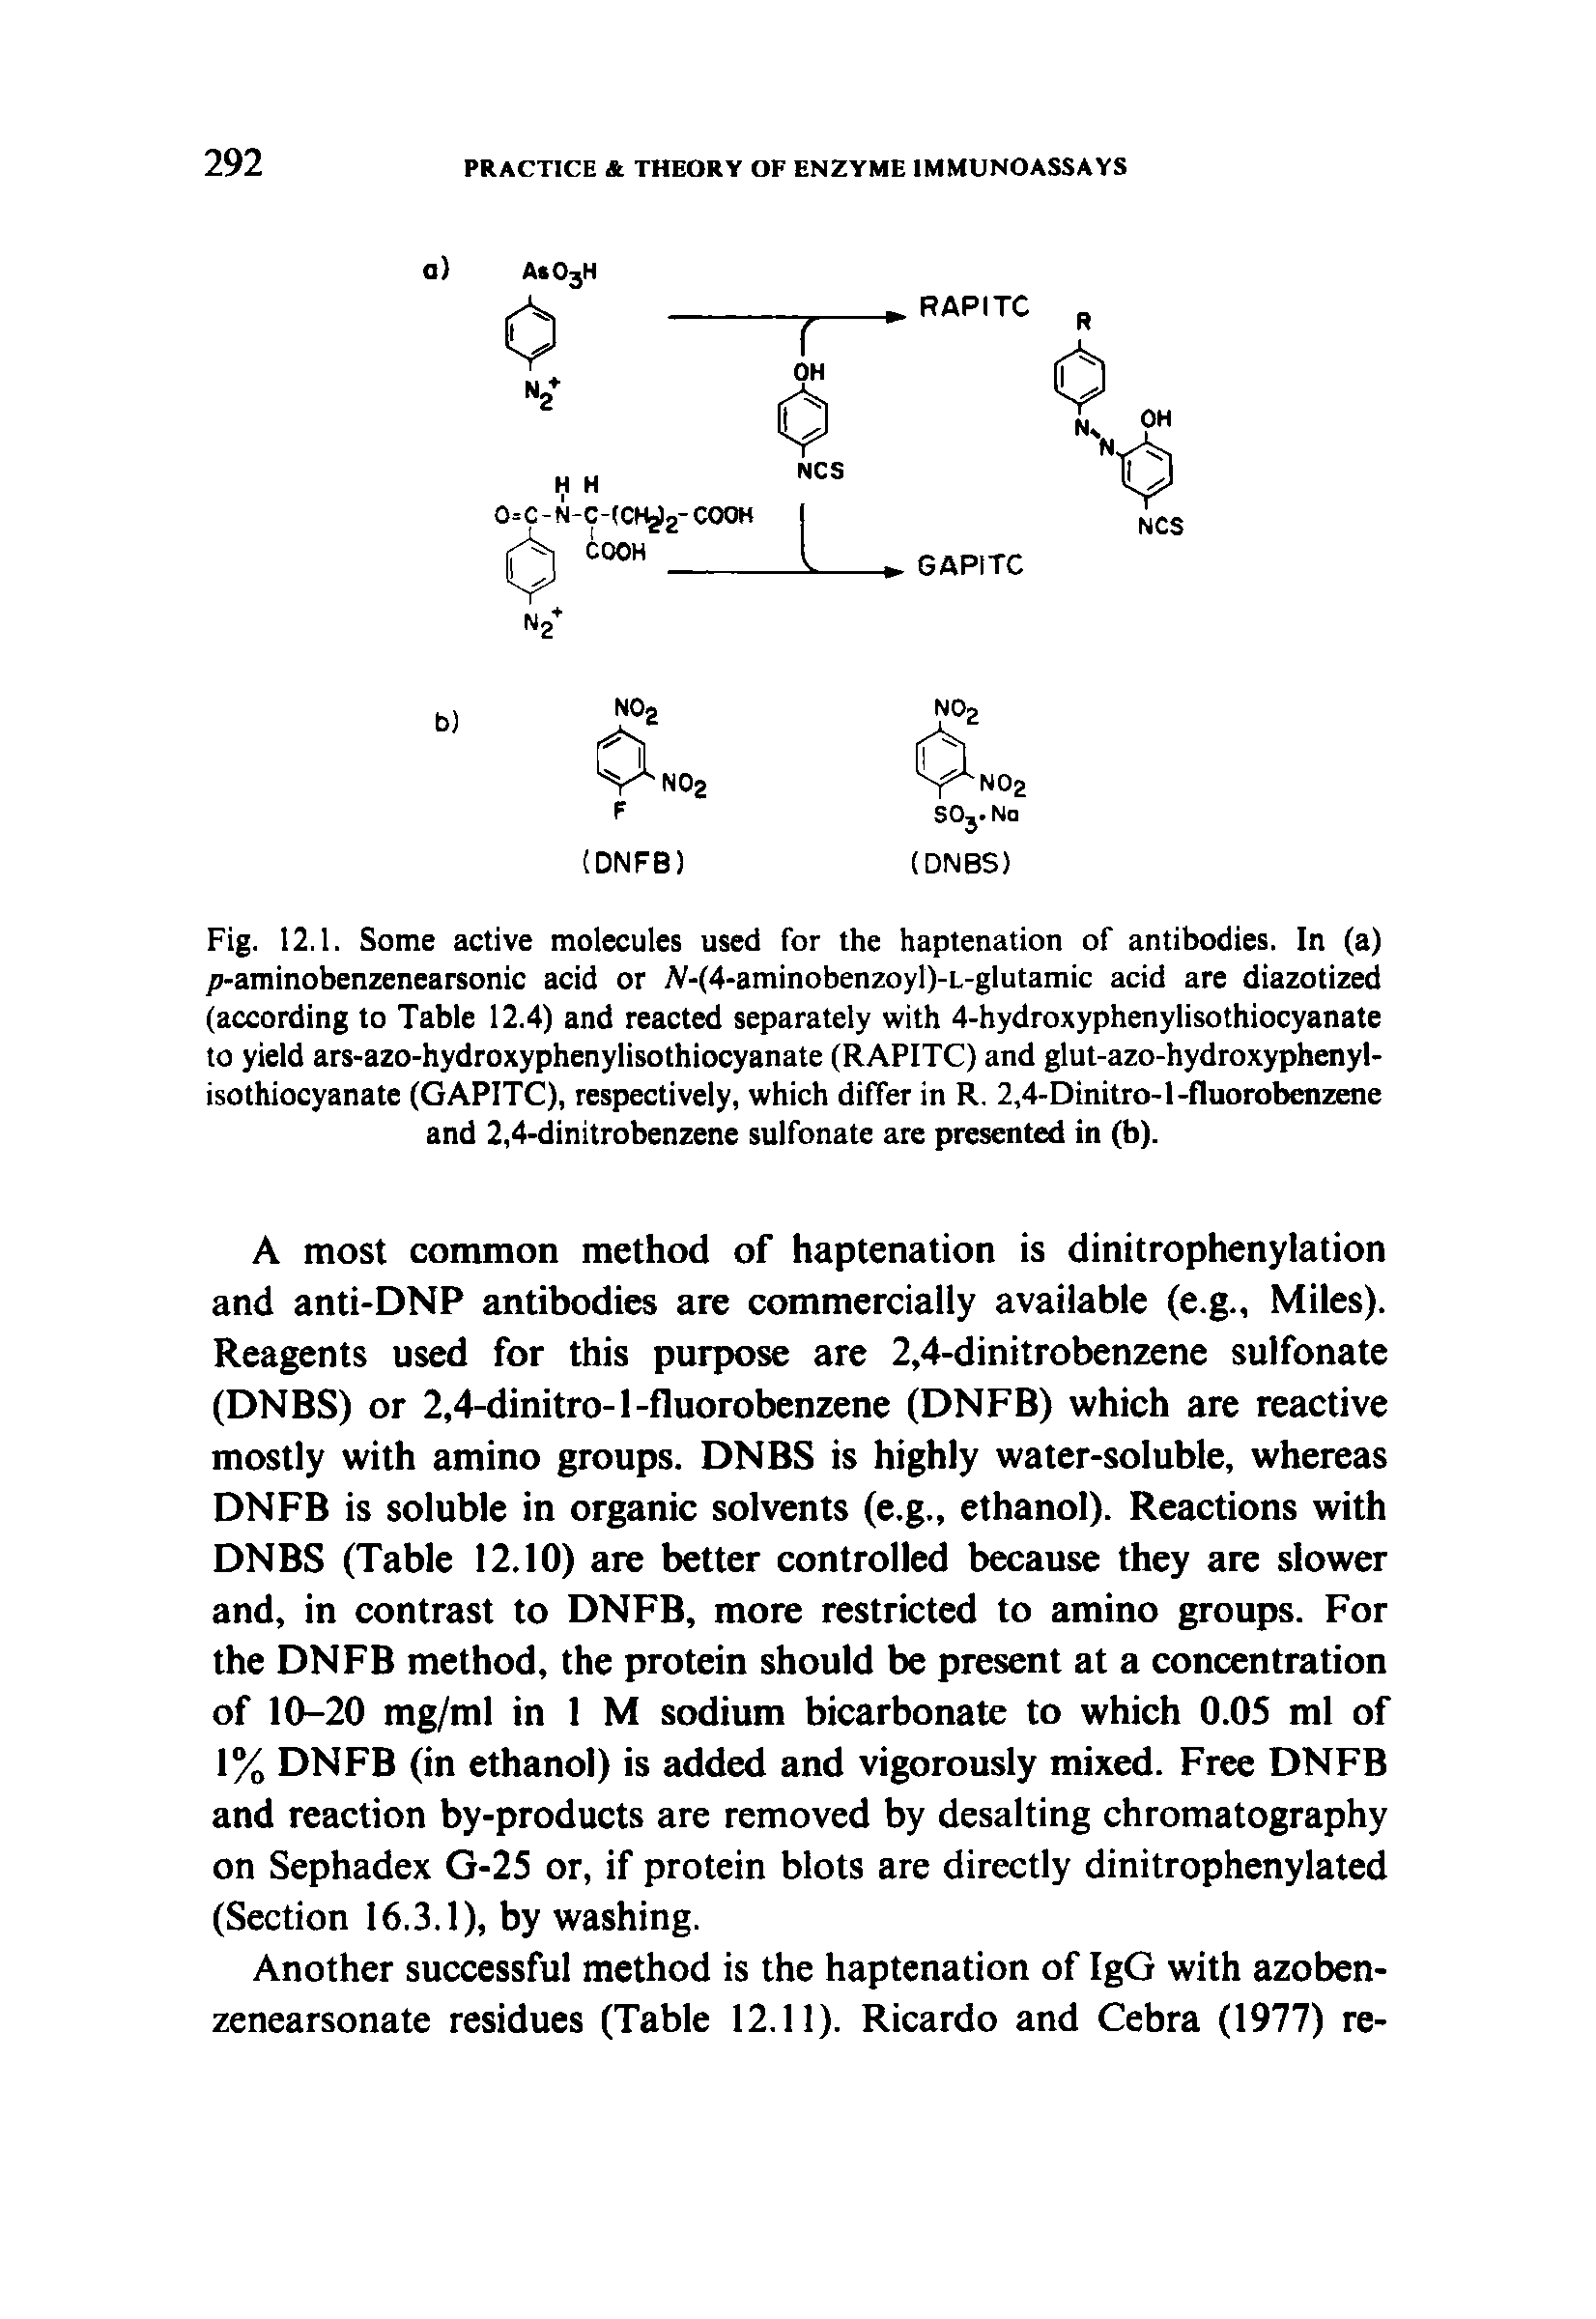 Fig. 12.1. Some active molecules used for the haptenation of antibodies. In (a) /i-aminobenzenearsonic acid or A -(4-aminobenzoyl)-L-glutamic acid are diazotized (according to Table 12.4) and reacted separately with 4-hydroxyphenylisothiocyanate to yield ars-azo-hydroxyphenylisothiocyanate (RAPITC) and glut-azo-hydroxyphenyl-isothiocyanate (GAPITC), respectively, which differ in R. 2,4-Dinitro-l-fluorobenzene and 2,4-dinitrobenzene sulfonate are presented in (b).